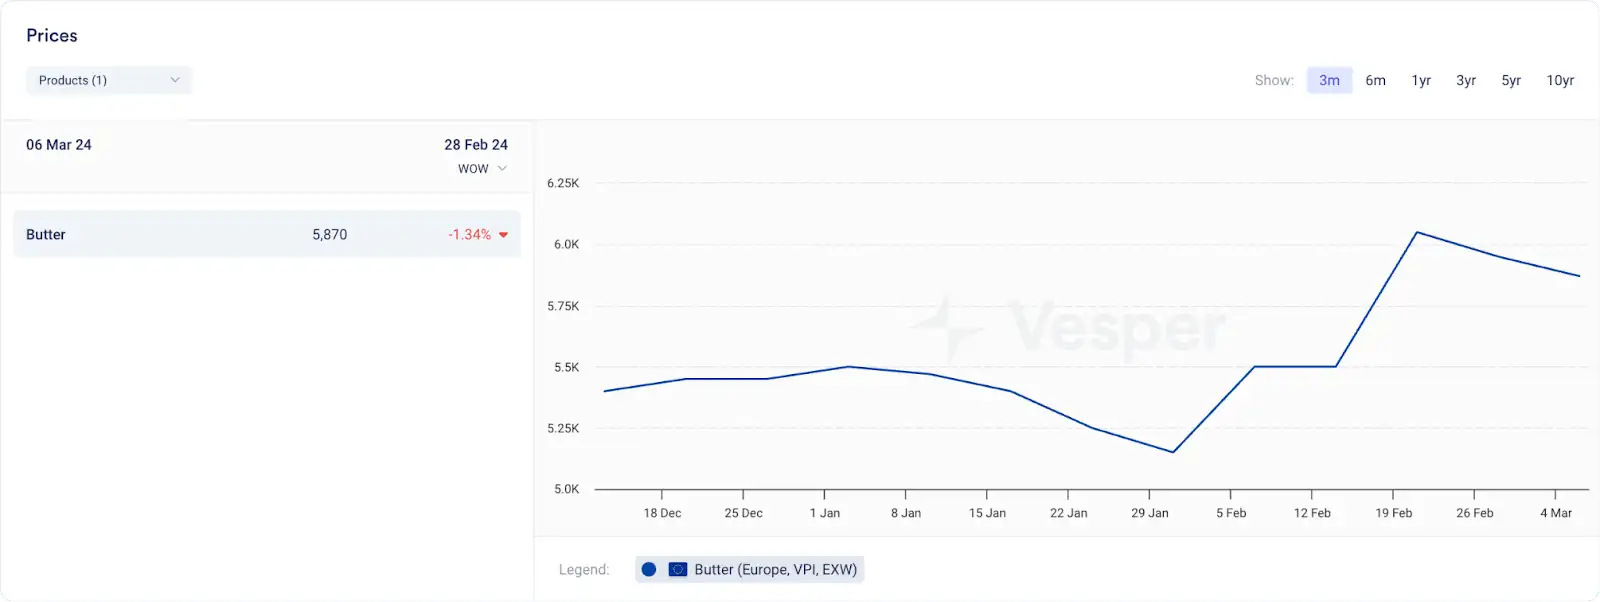 European Butter prices according to the VPI in EUR/mt